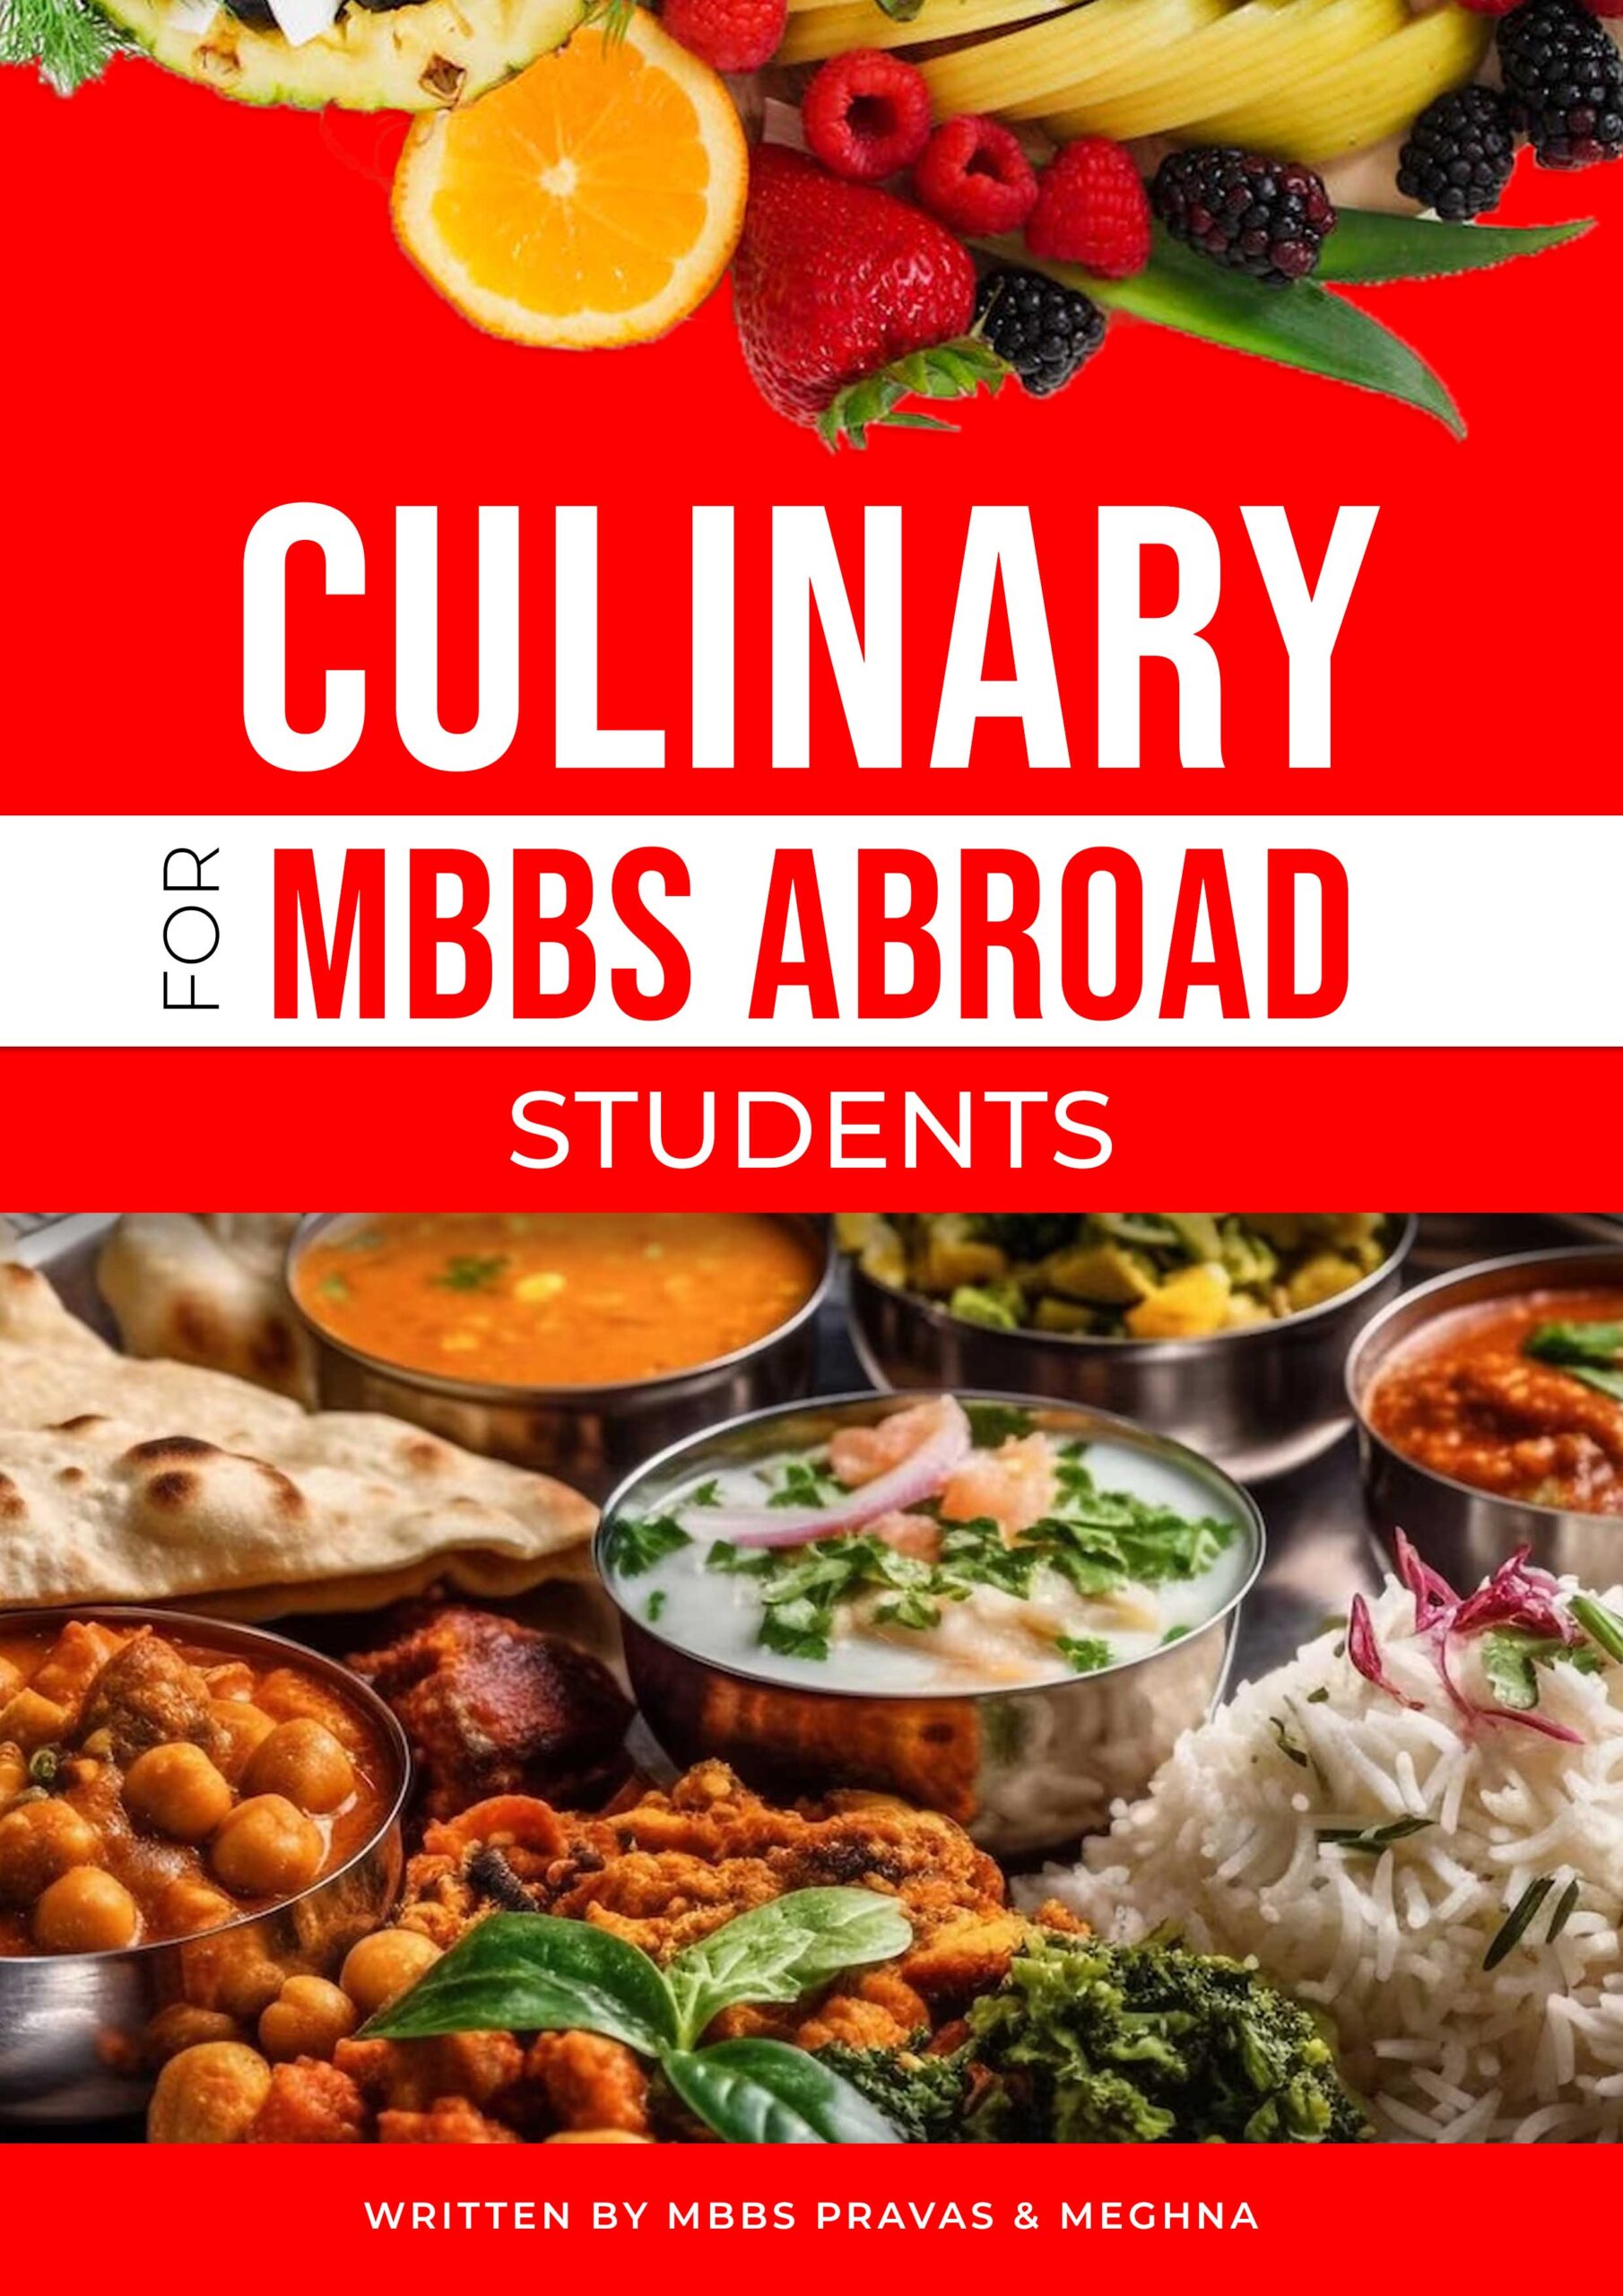 Culinary For MBBS Abroad Students by MBBS Pravas